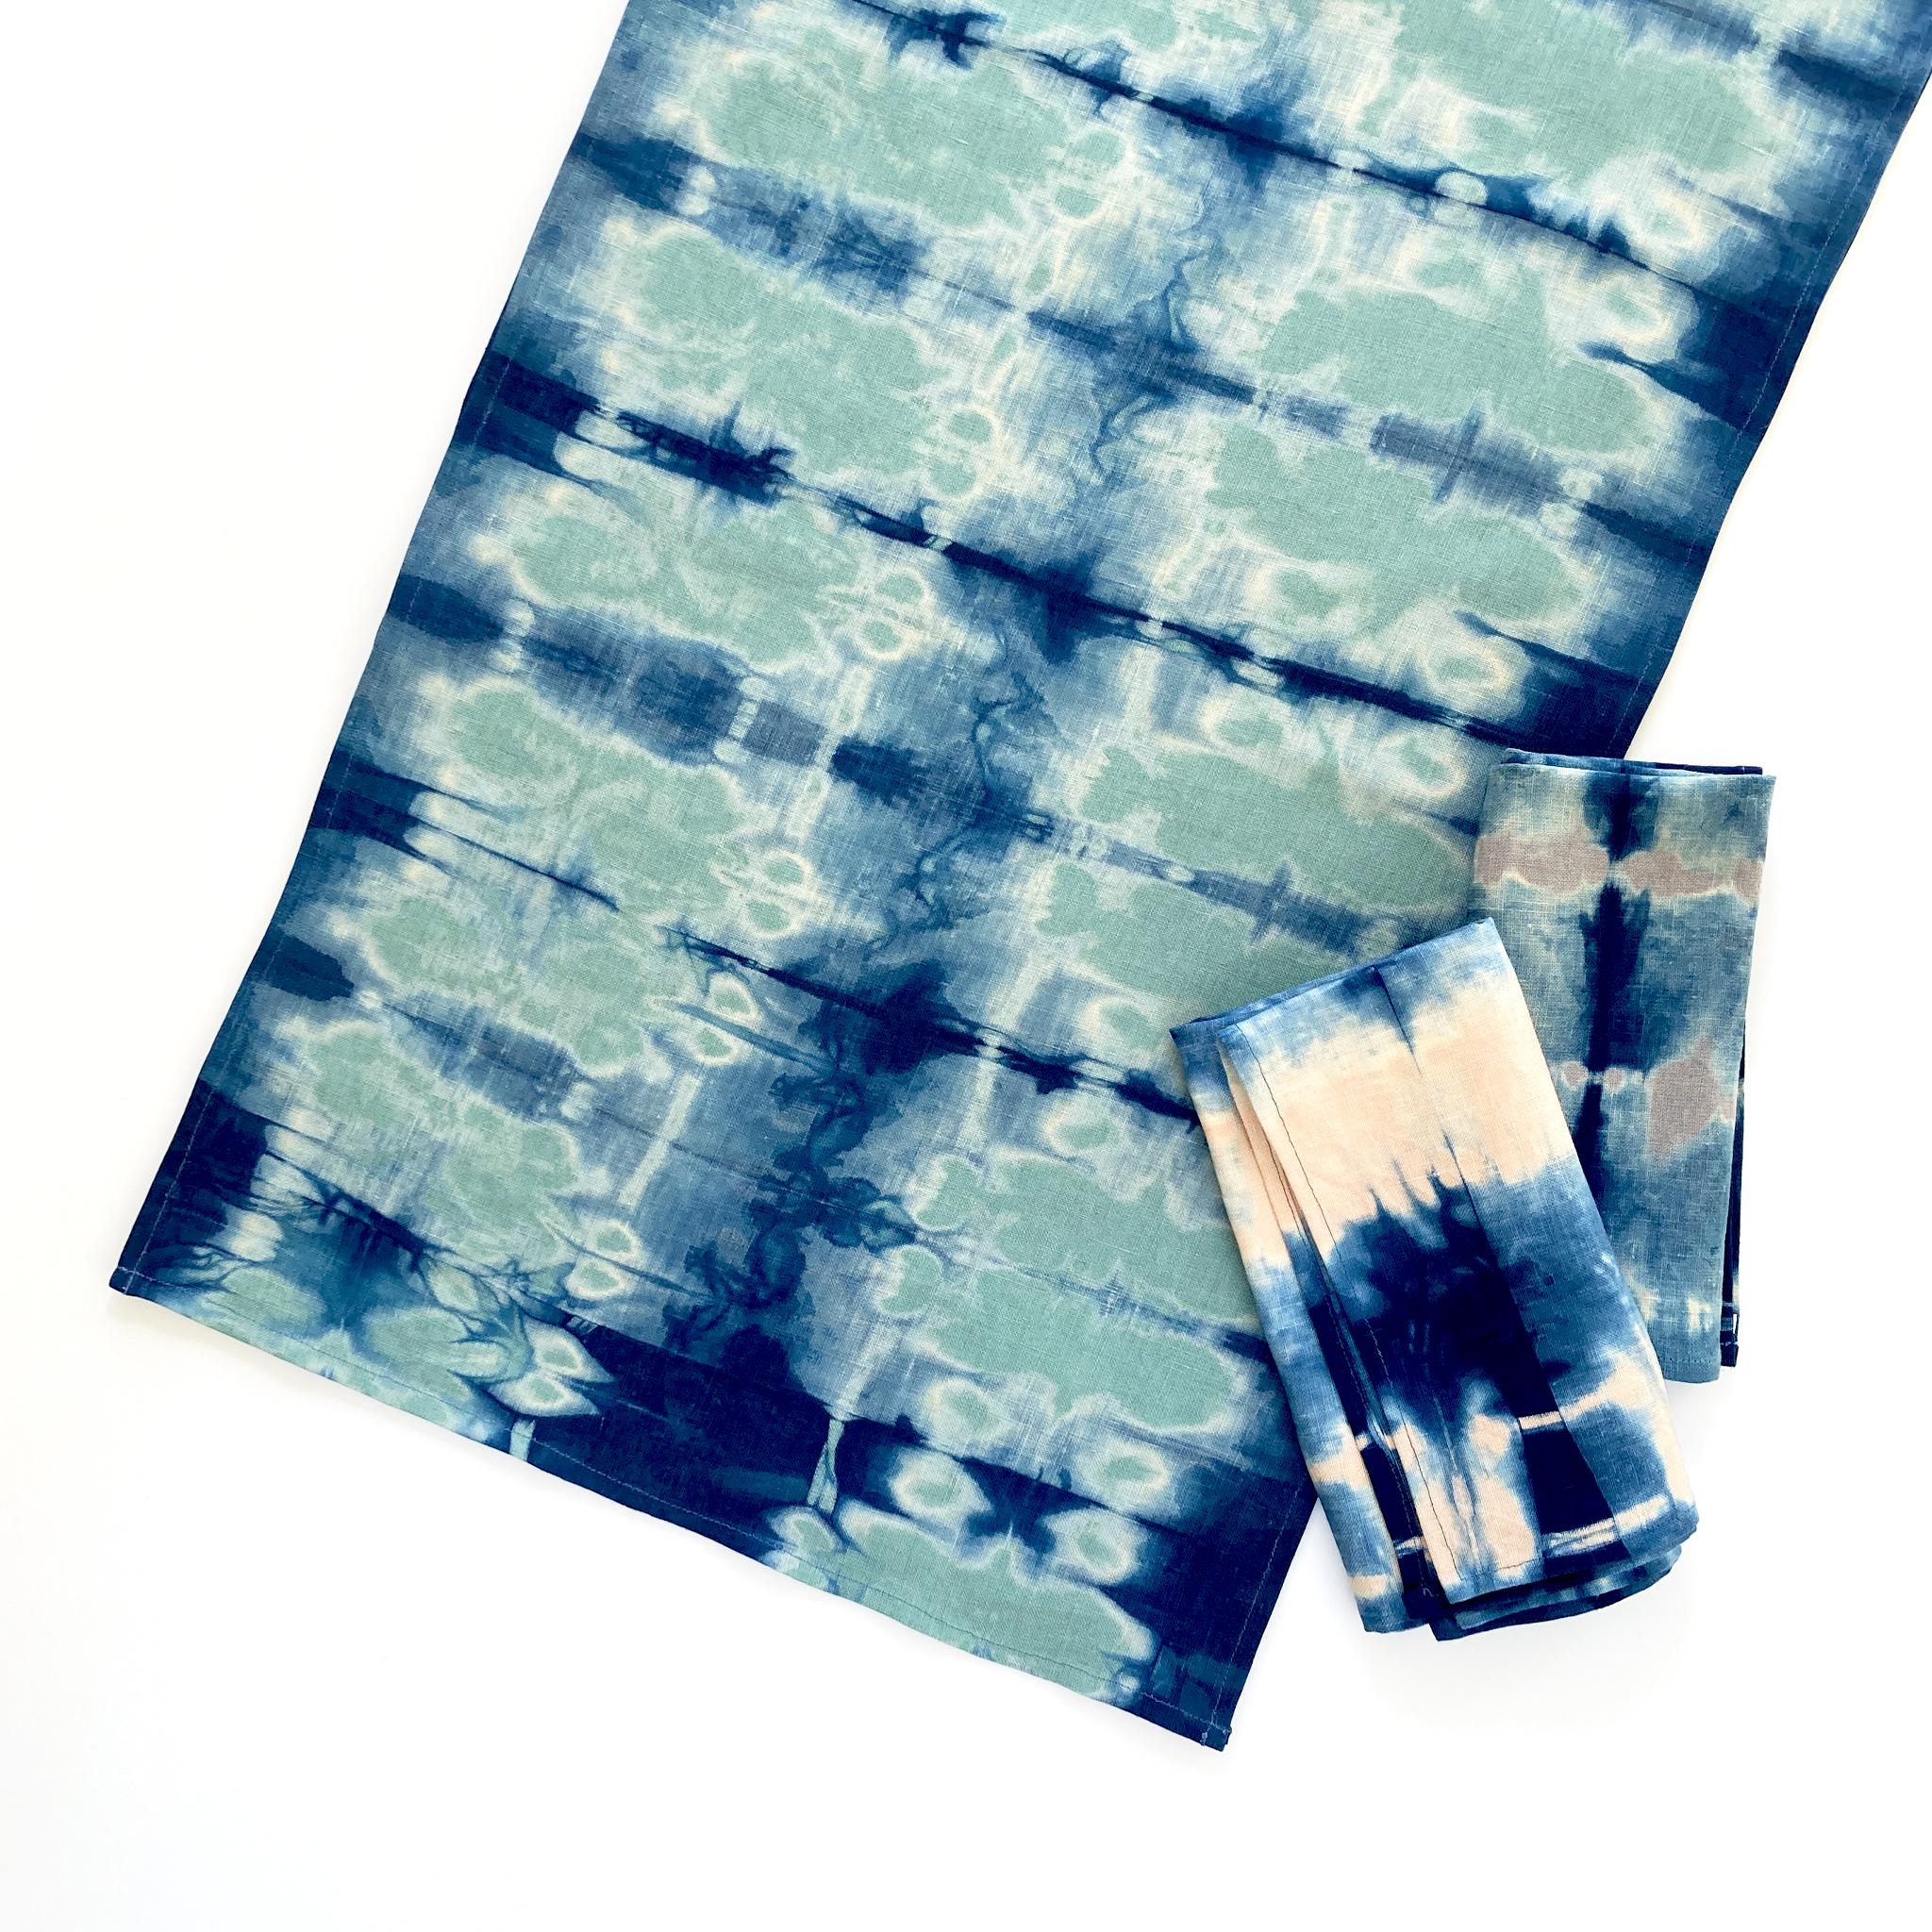 Jade green linen table runner dyed with indigo in Pleat pattern. Hand-dyed and sewn in New York City. Runner measures approximately 18 x 72 inches. Each linen runner is hand dyed and one of a kind. 

Each linen panel is cut and folded by hand, in